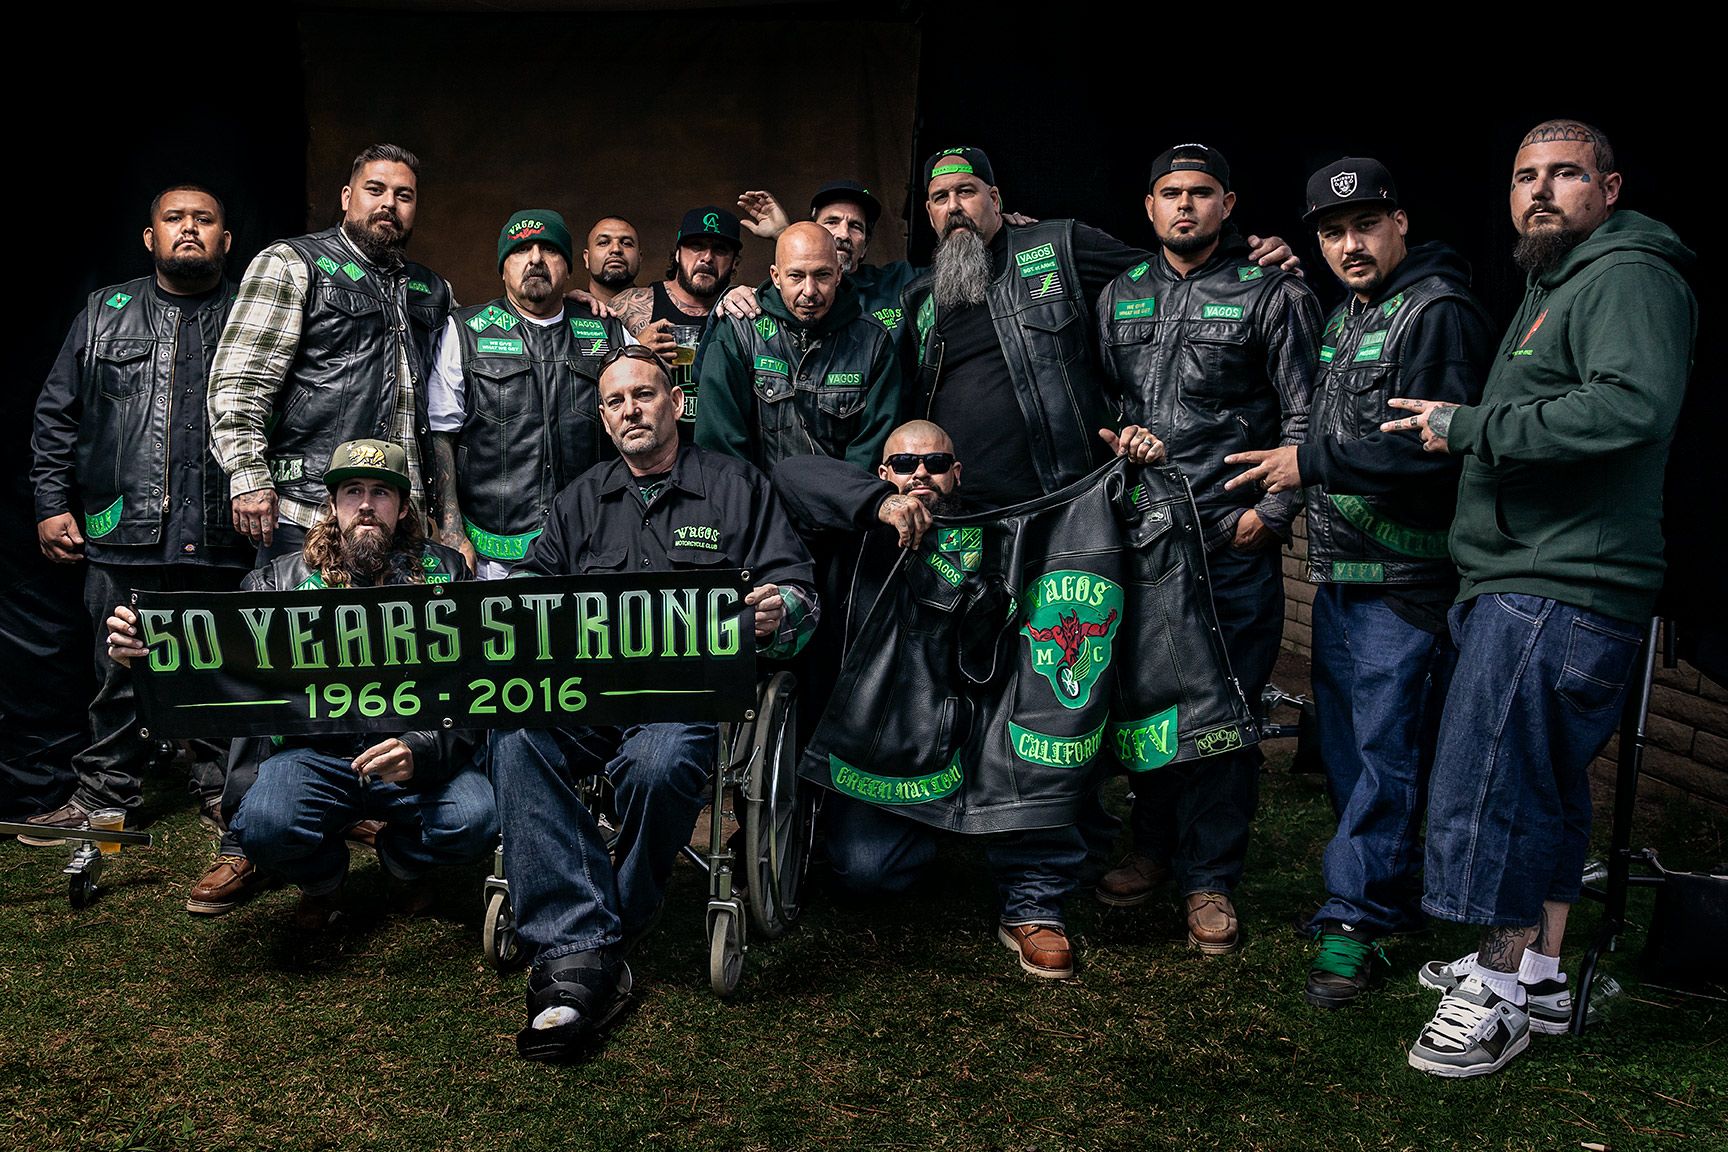 An In-depth Look At The Vagos Motorcycle Club